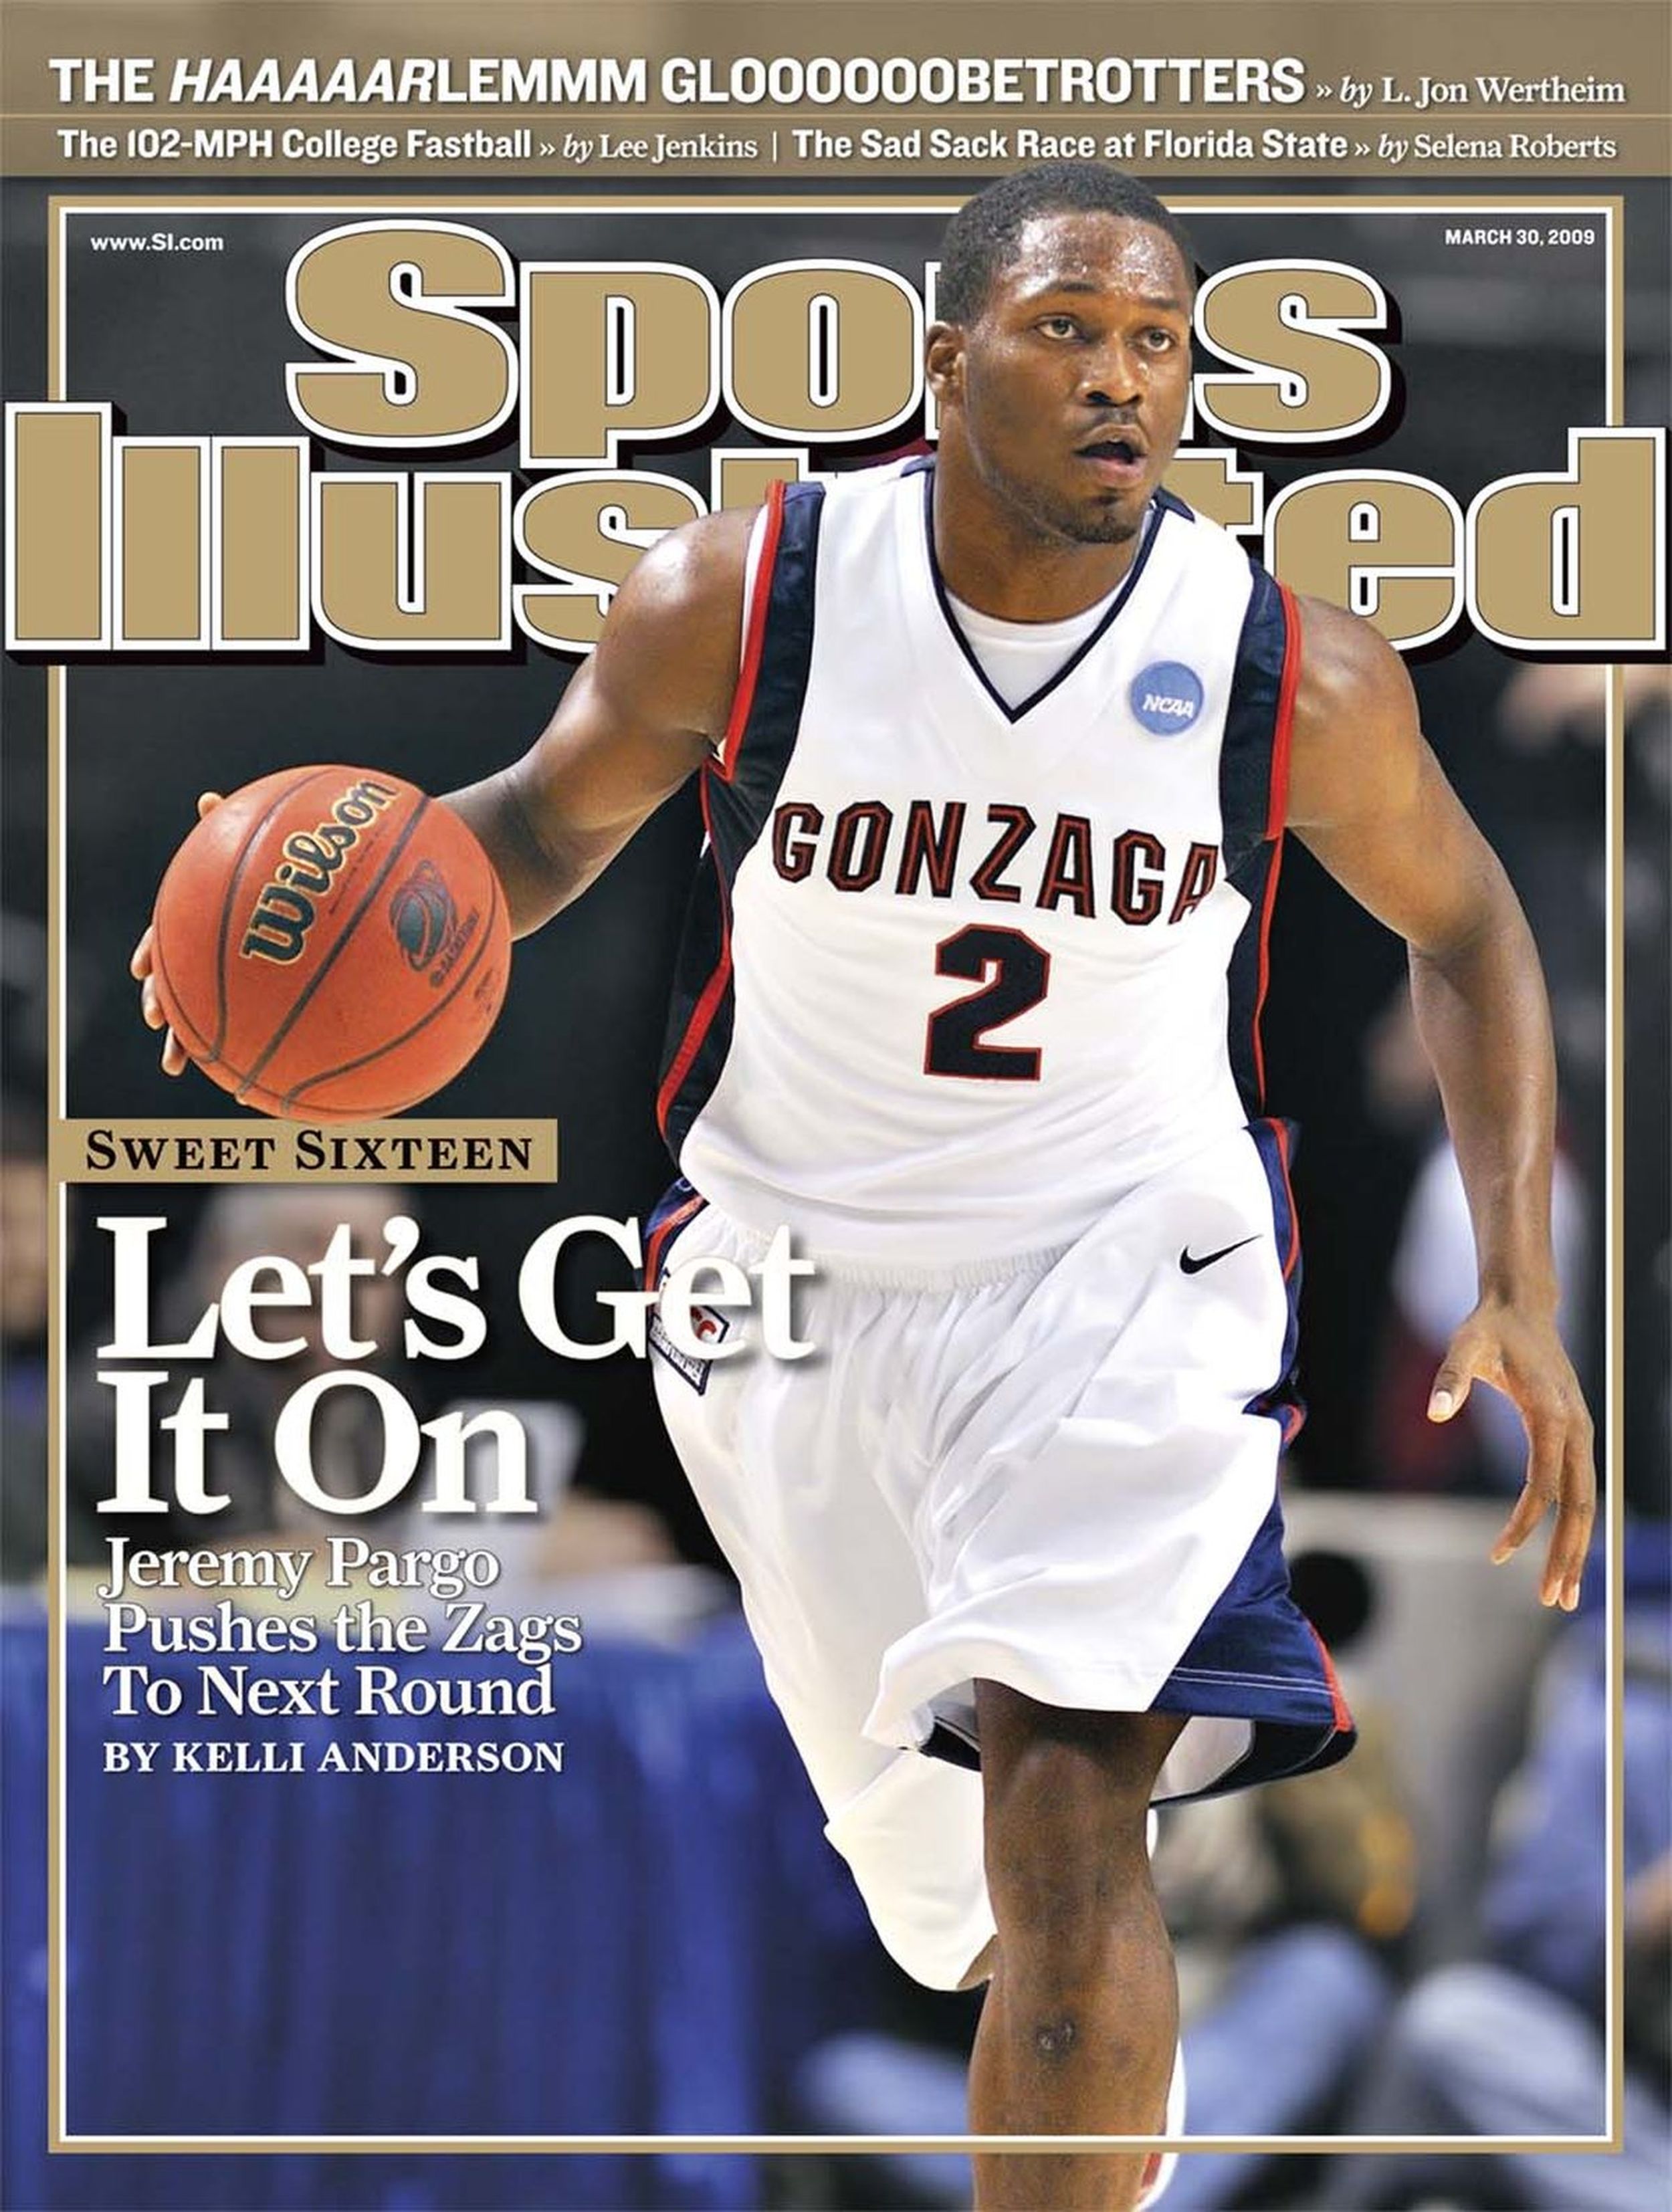 It's the program': As Gonzaga makes the cover of Sports